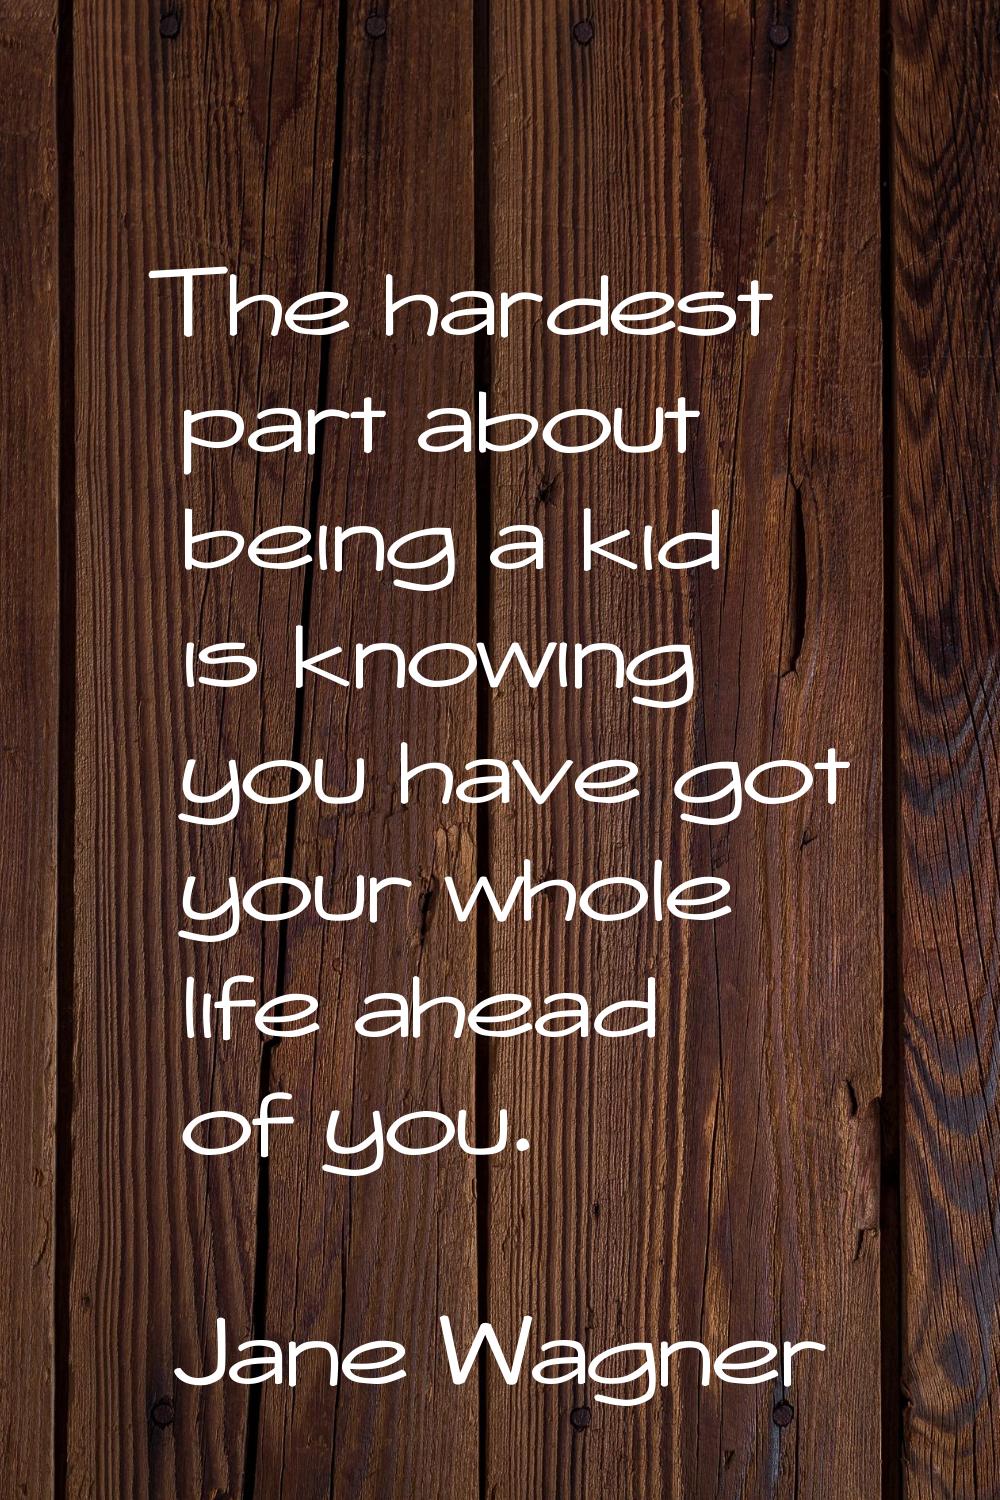 The hardest part about being a kid is knowing you have got your whole life ahead of you.